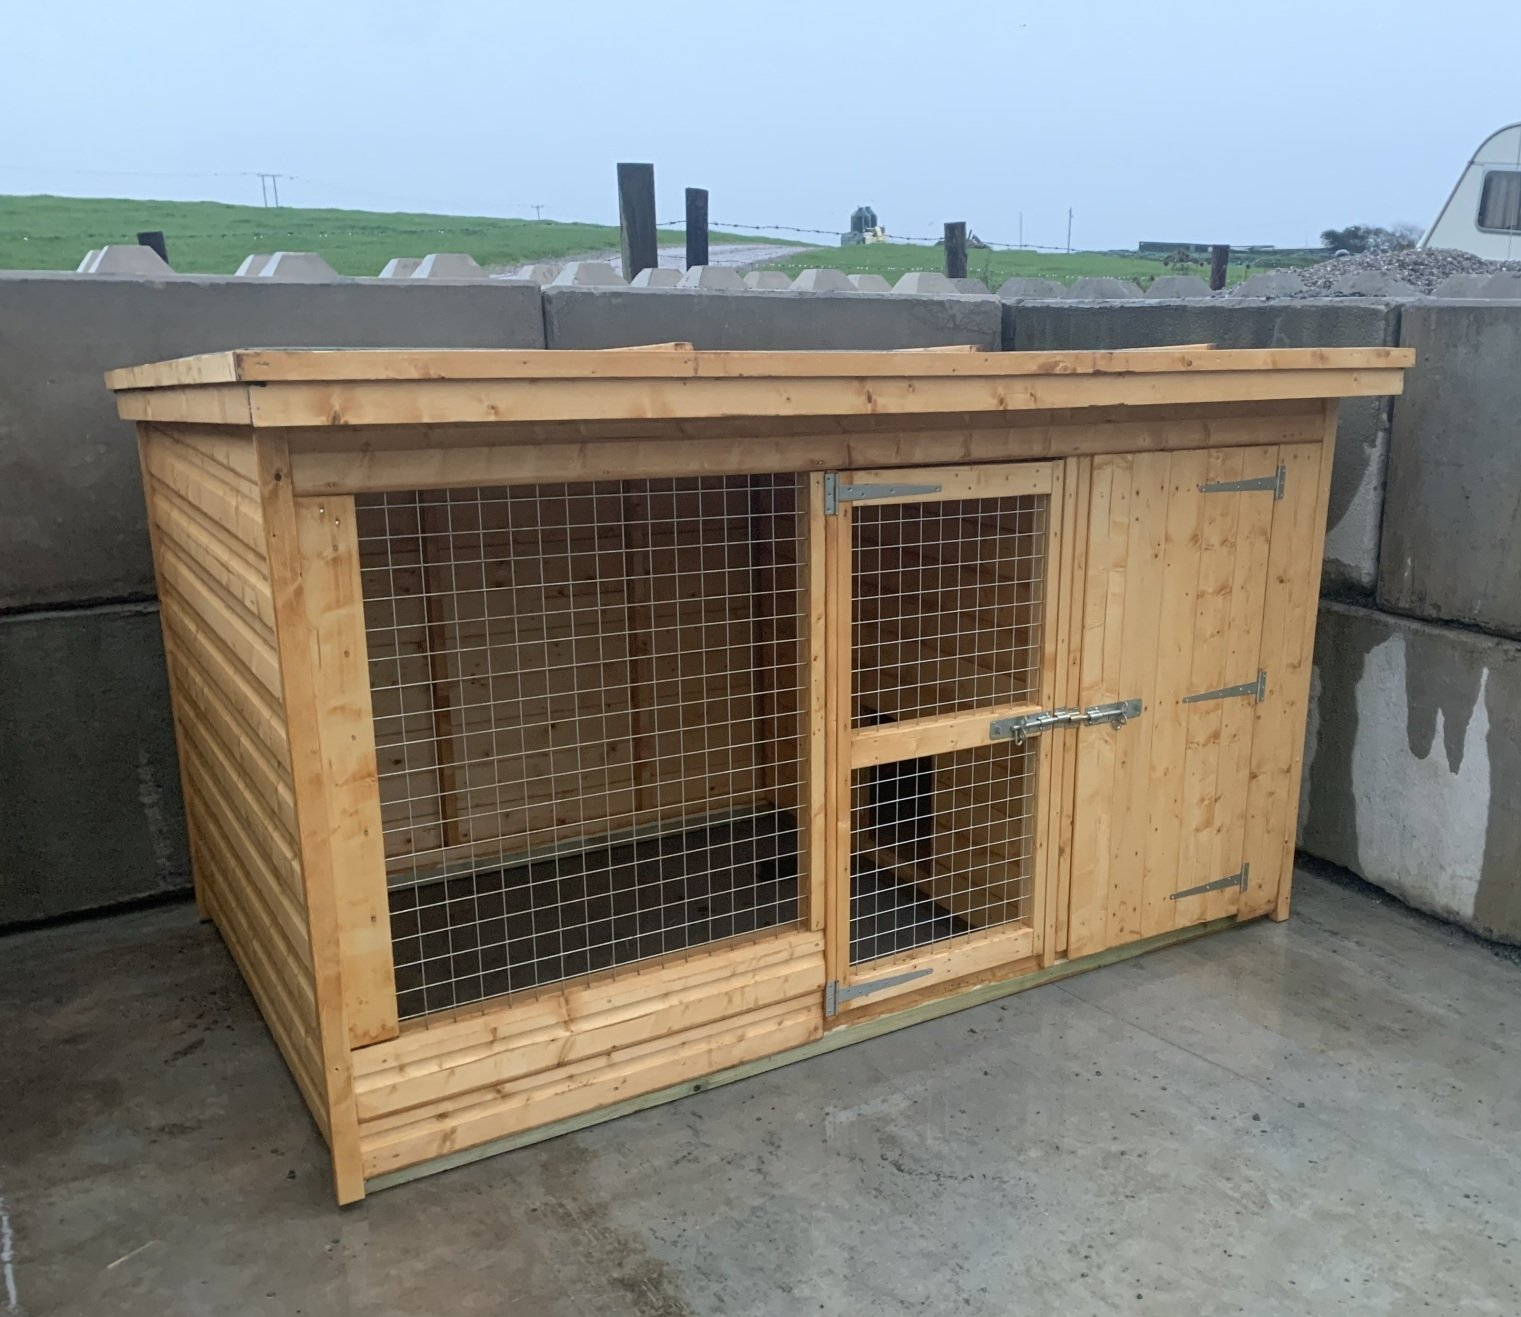 8' x 5' Kennel and run. No floor on the run and a wooden 19mm floor on the kennel side.